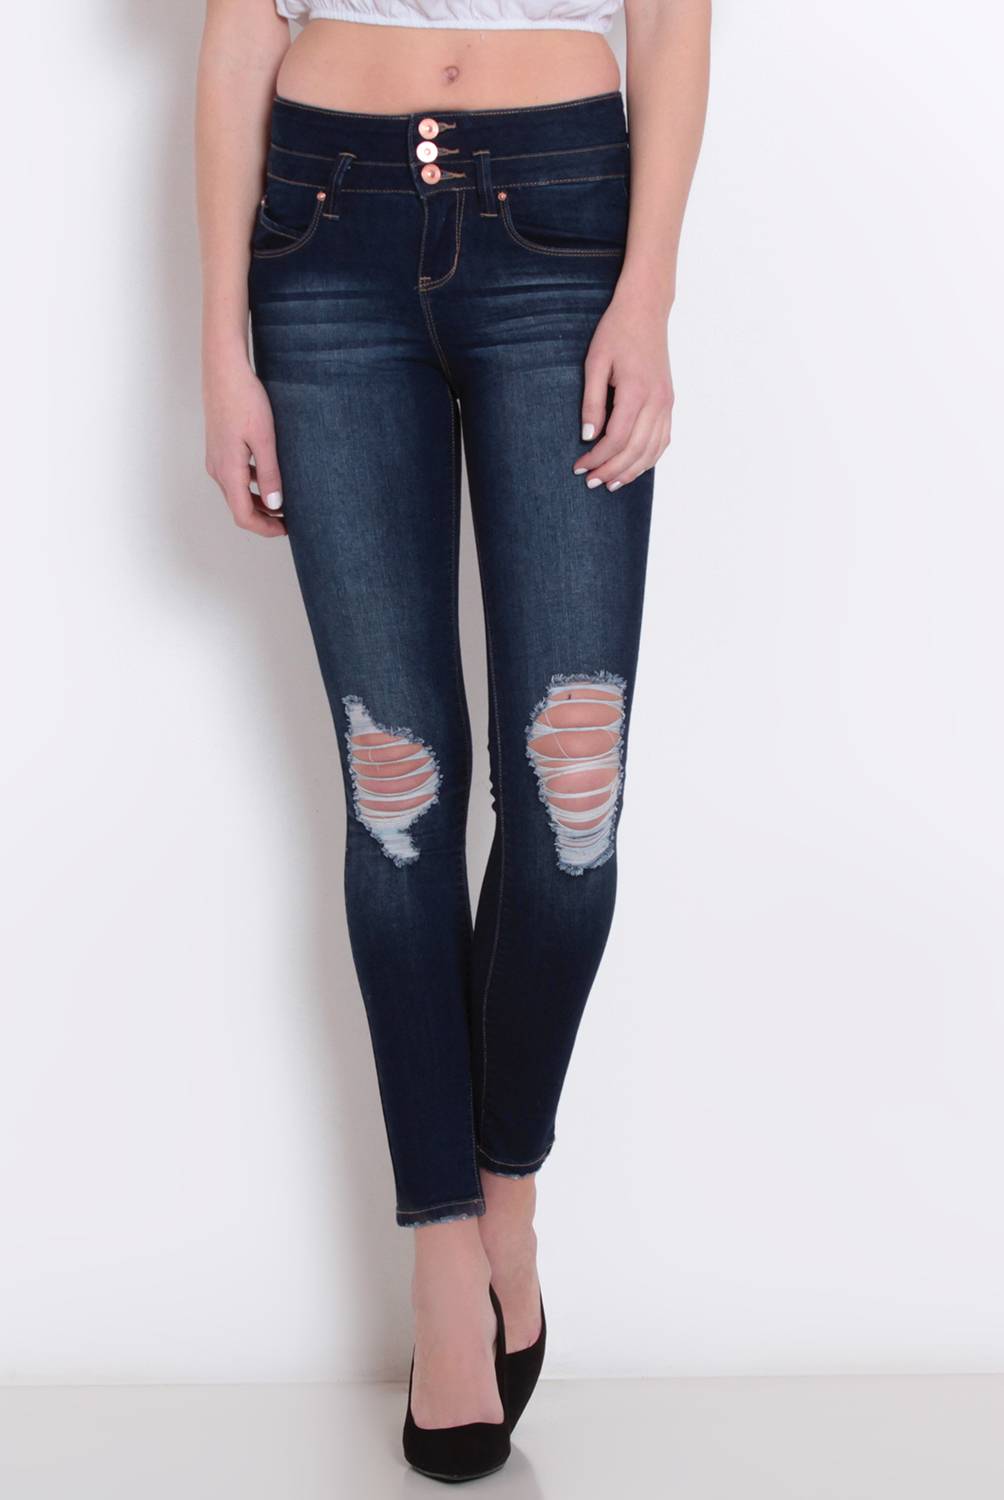 Wados - Jeans